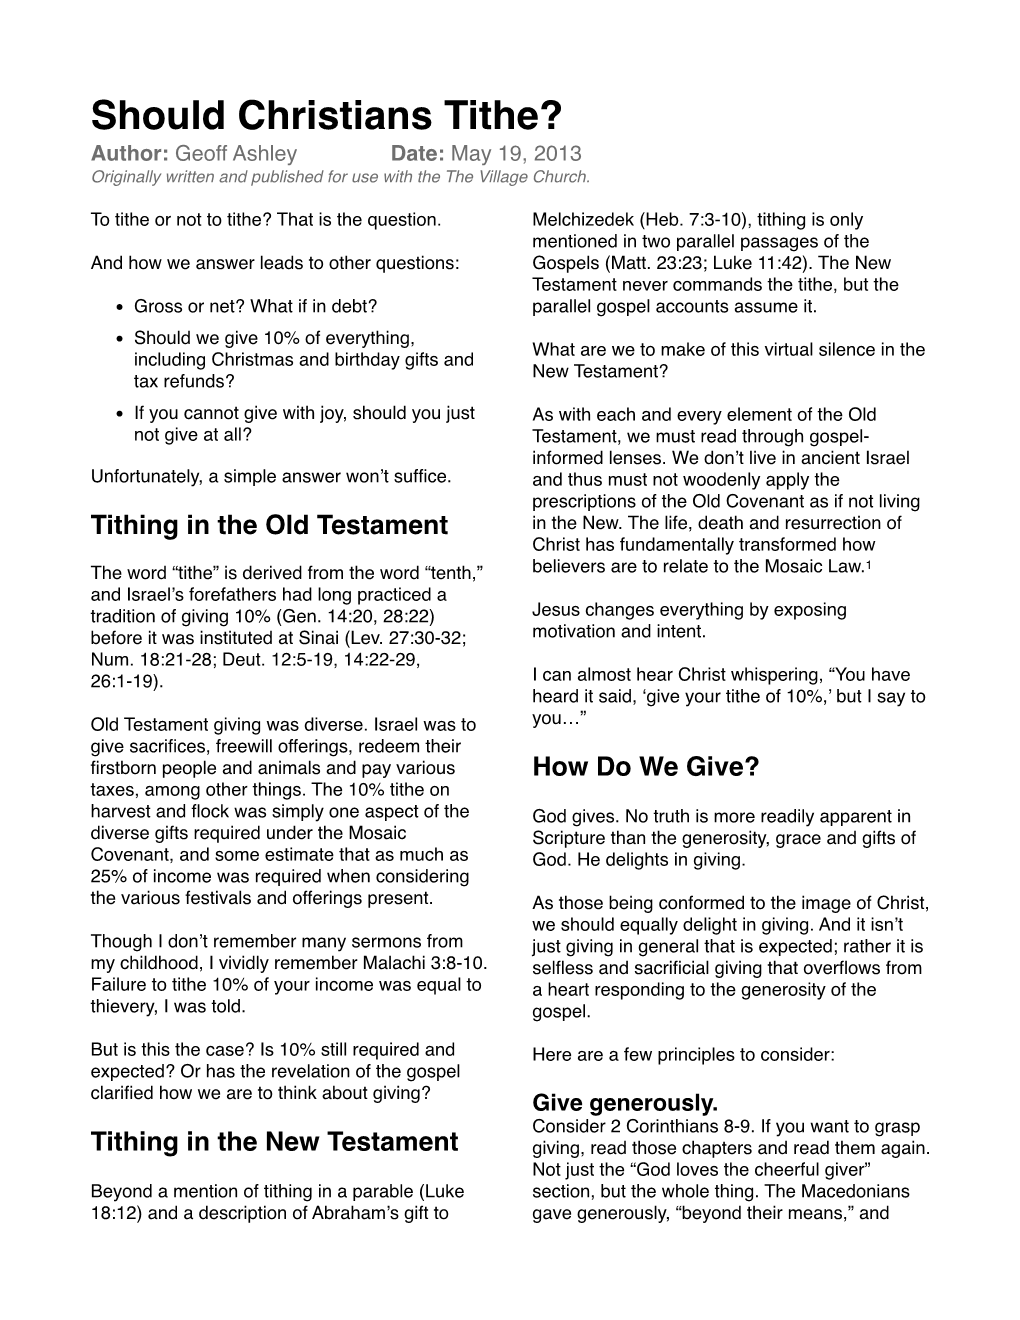 Should Christians Tithe? Author: Geoff Ashley Date: May 19, 2013 Originally Written and Published for Use with the the Village Church